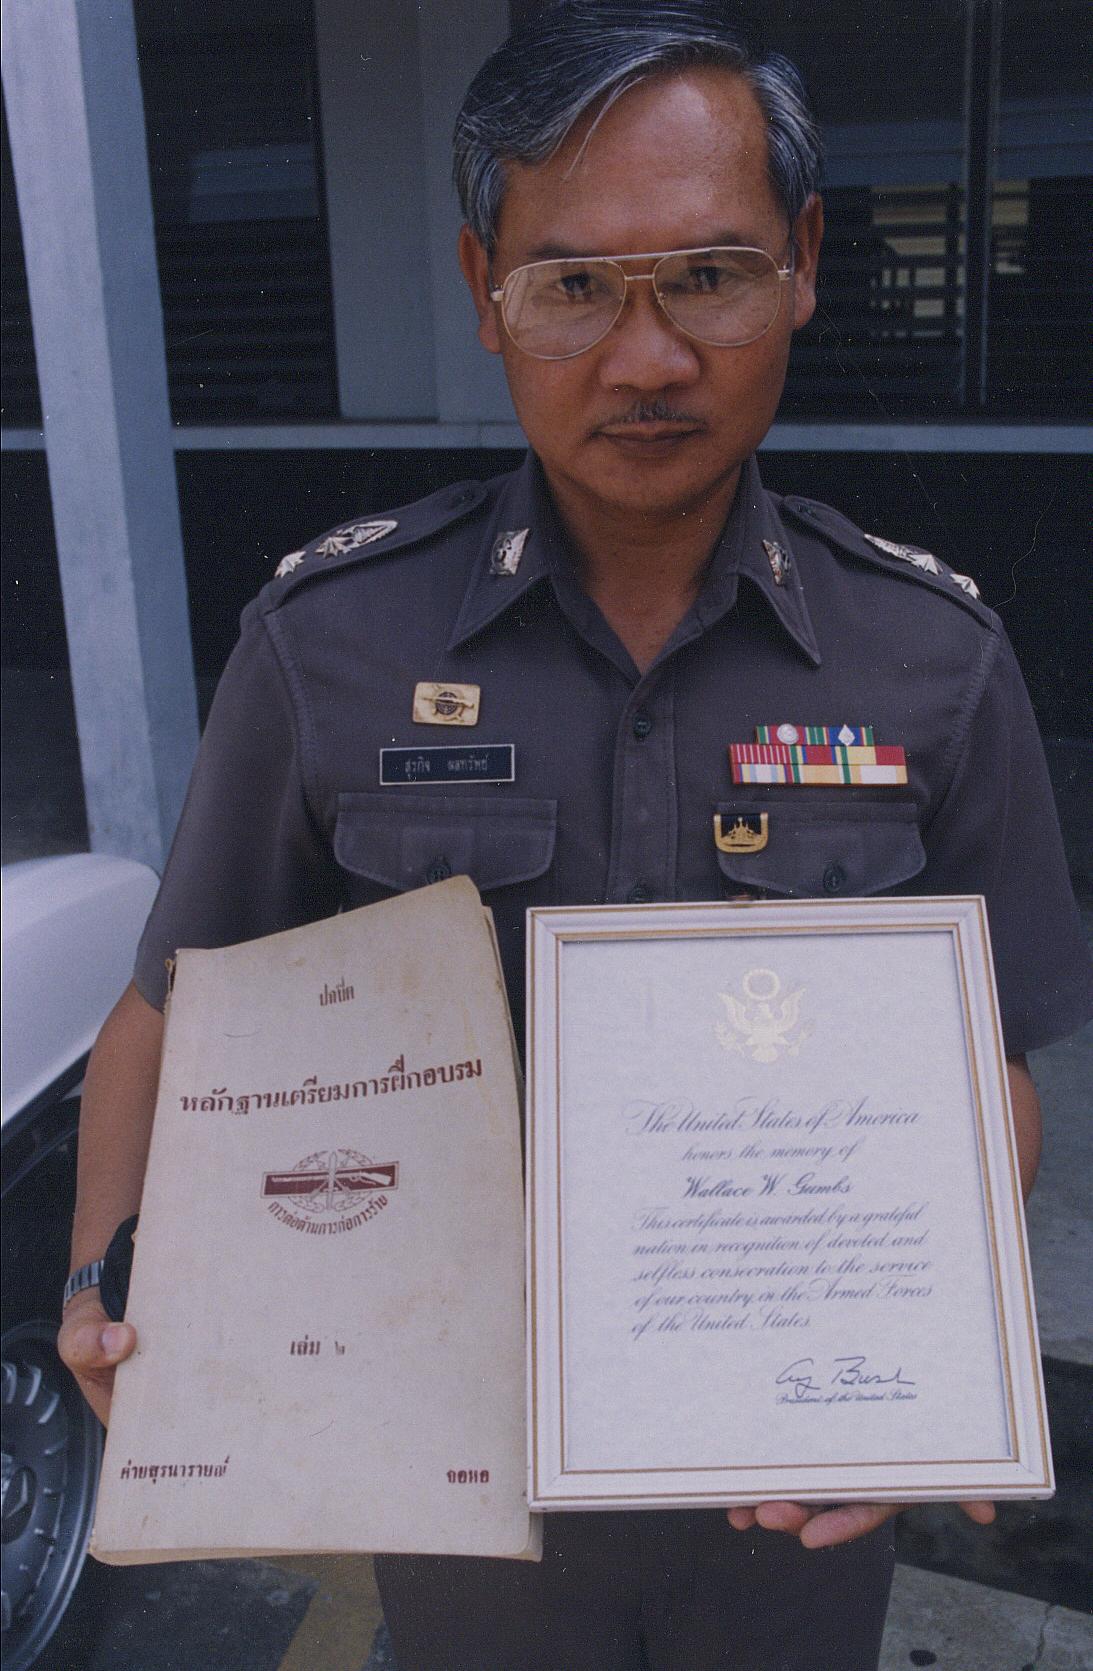 Royal Thai Police Commander, Lt Colonel, holding a copy of our book, Counterinsurgency Training for Police Officers, and a copy of a letter from President George Bush I, regarding the death of SSG Wallace Gumbs